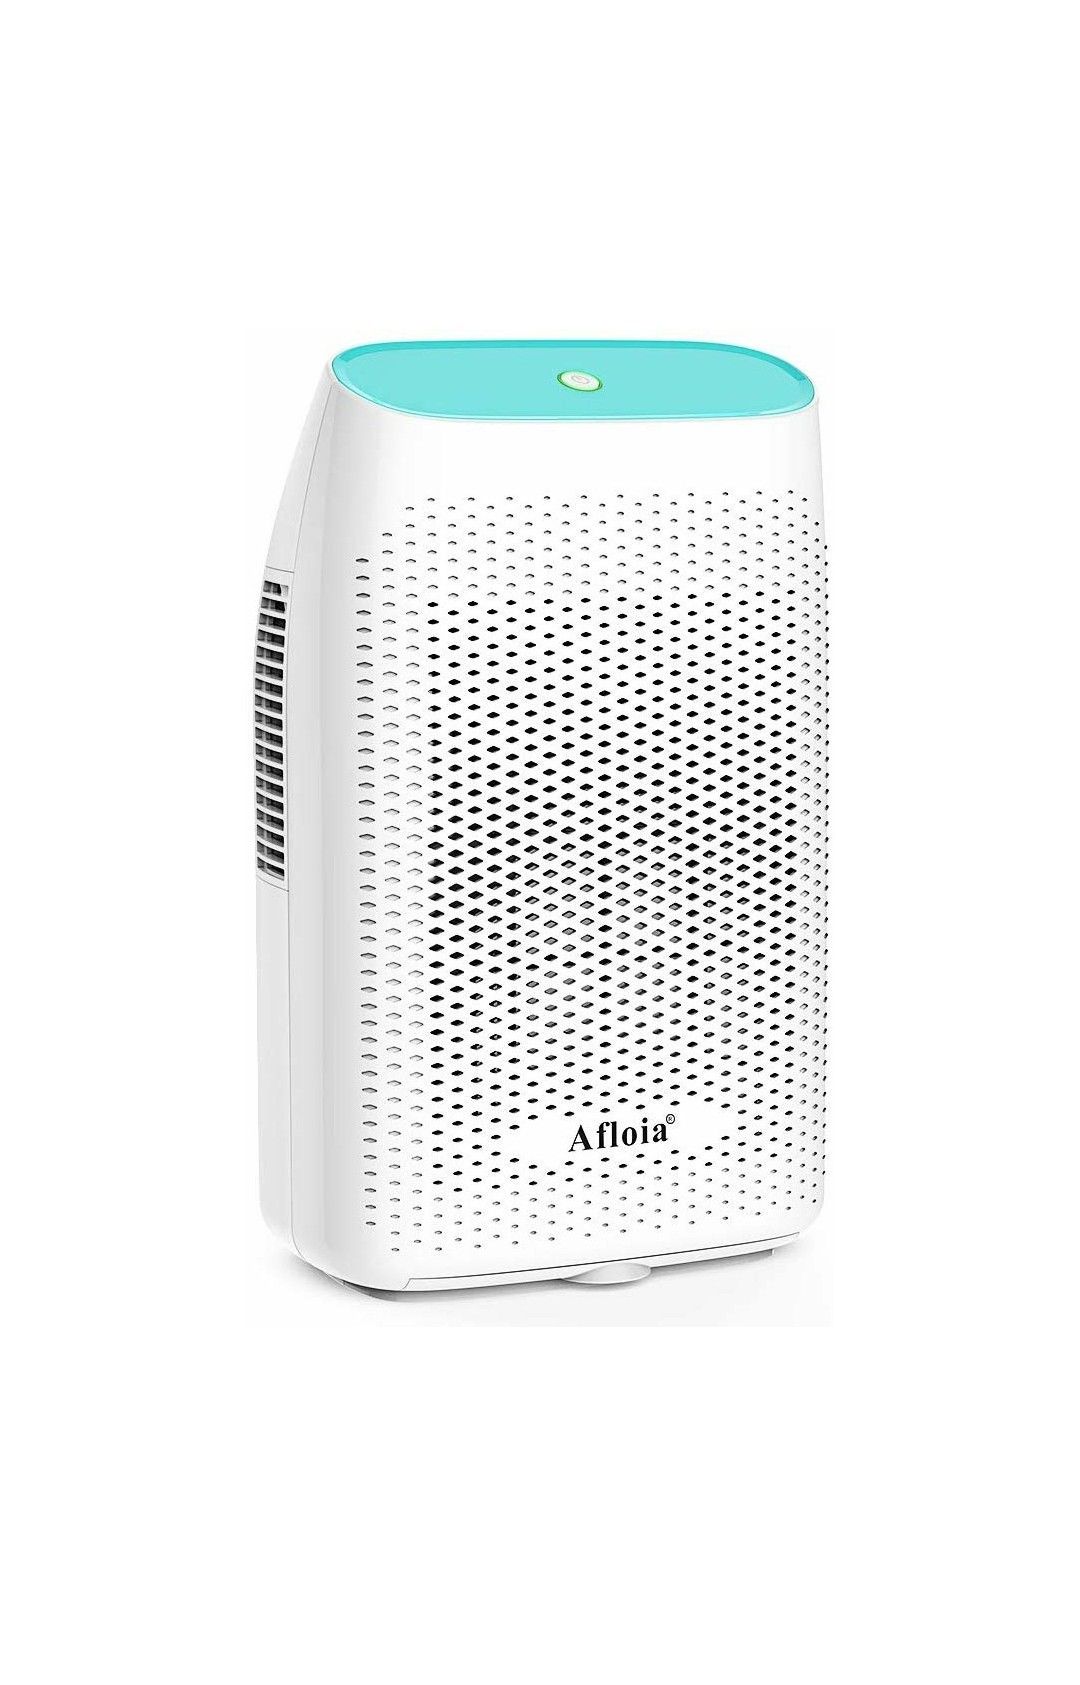 (C3) Afloia Electric Dehumidifier for Home Bathroom 2000ML(68 oz),Portable Dehumidifiers for Home 2201 Cubic Feet Space,Quiet Auto-Off Dehumidifiers